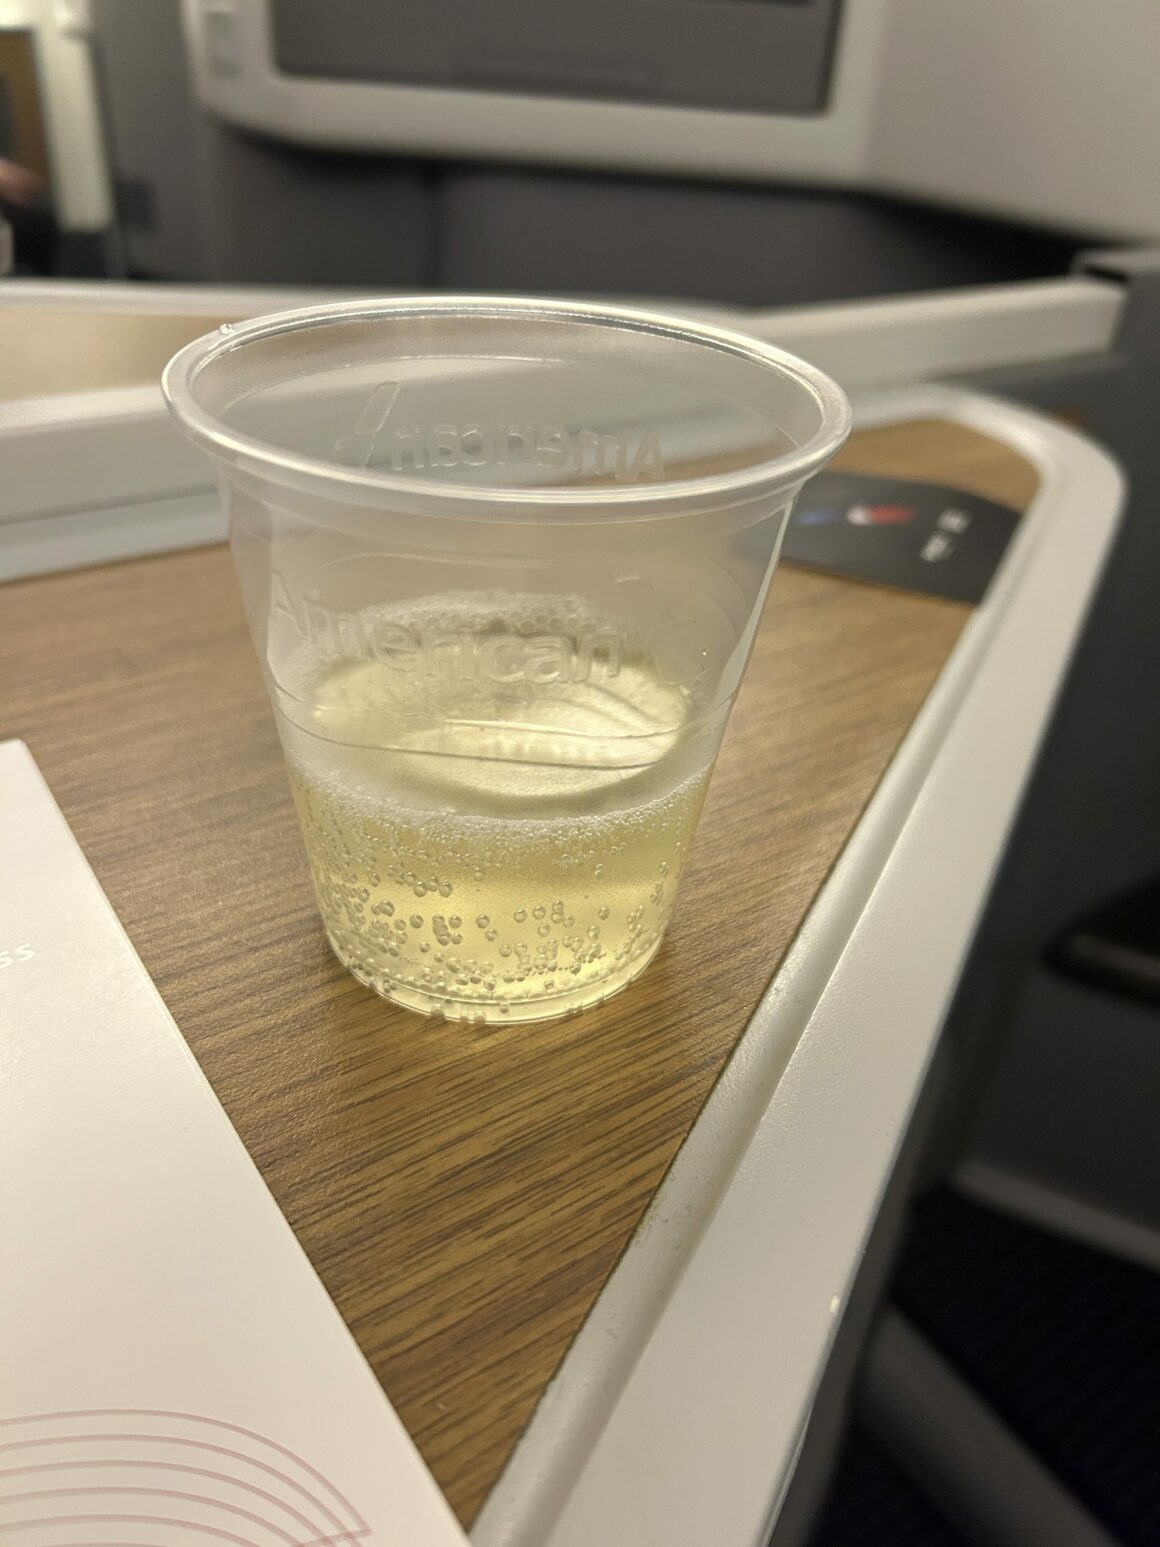 American Airlines B777-300ER Business Class champagne 